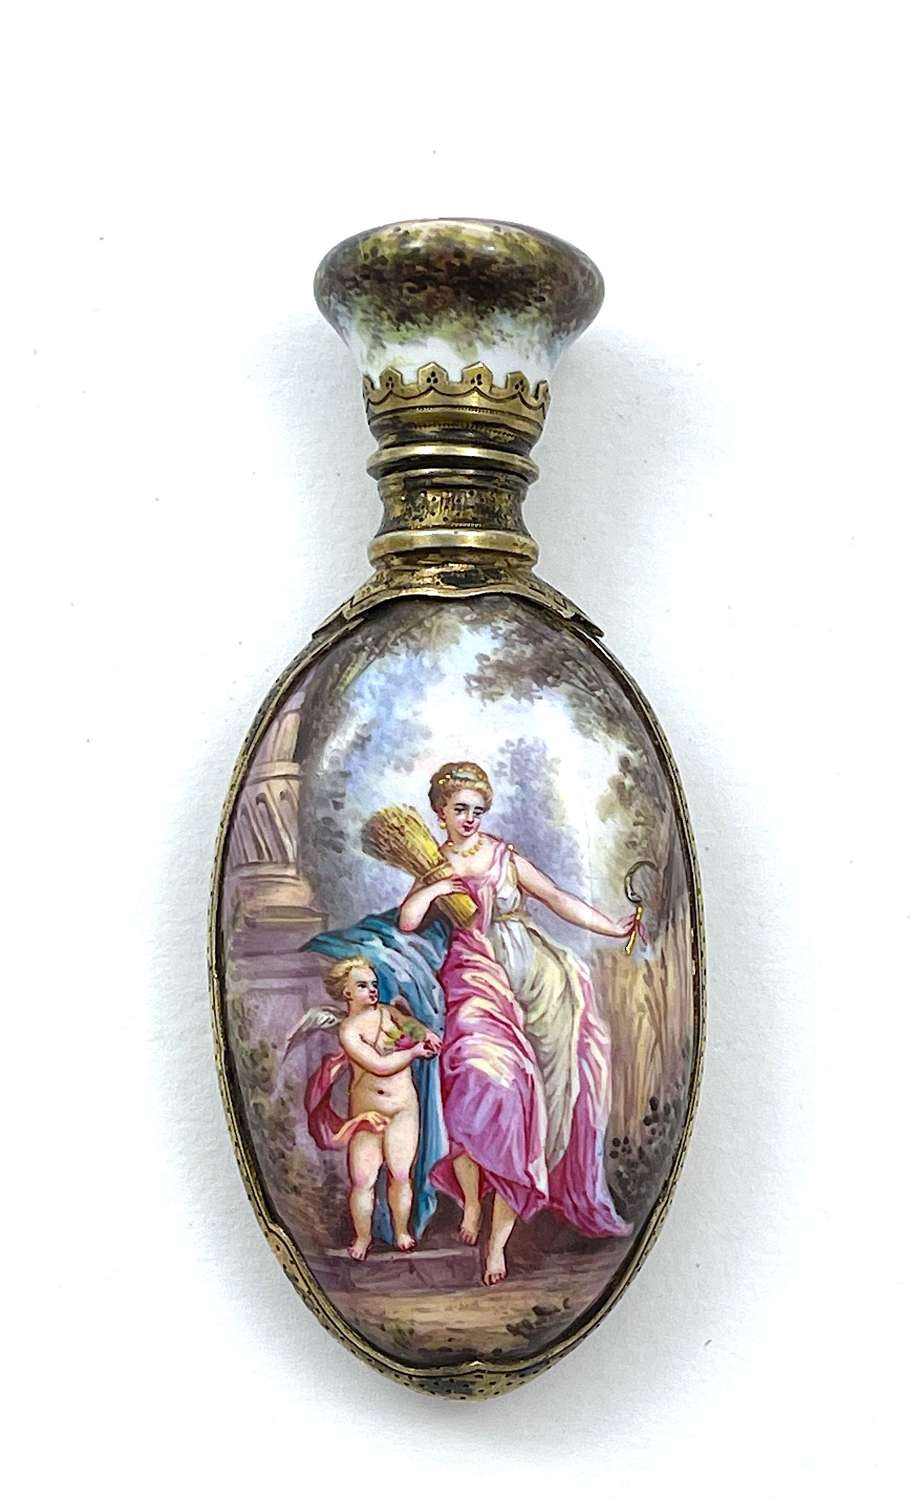 The Finest Antique Vienna Enamelled and Silver Perfume Bottle